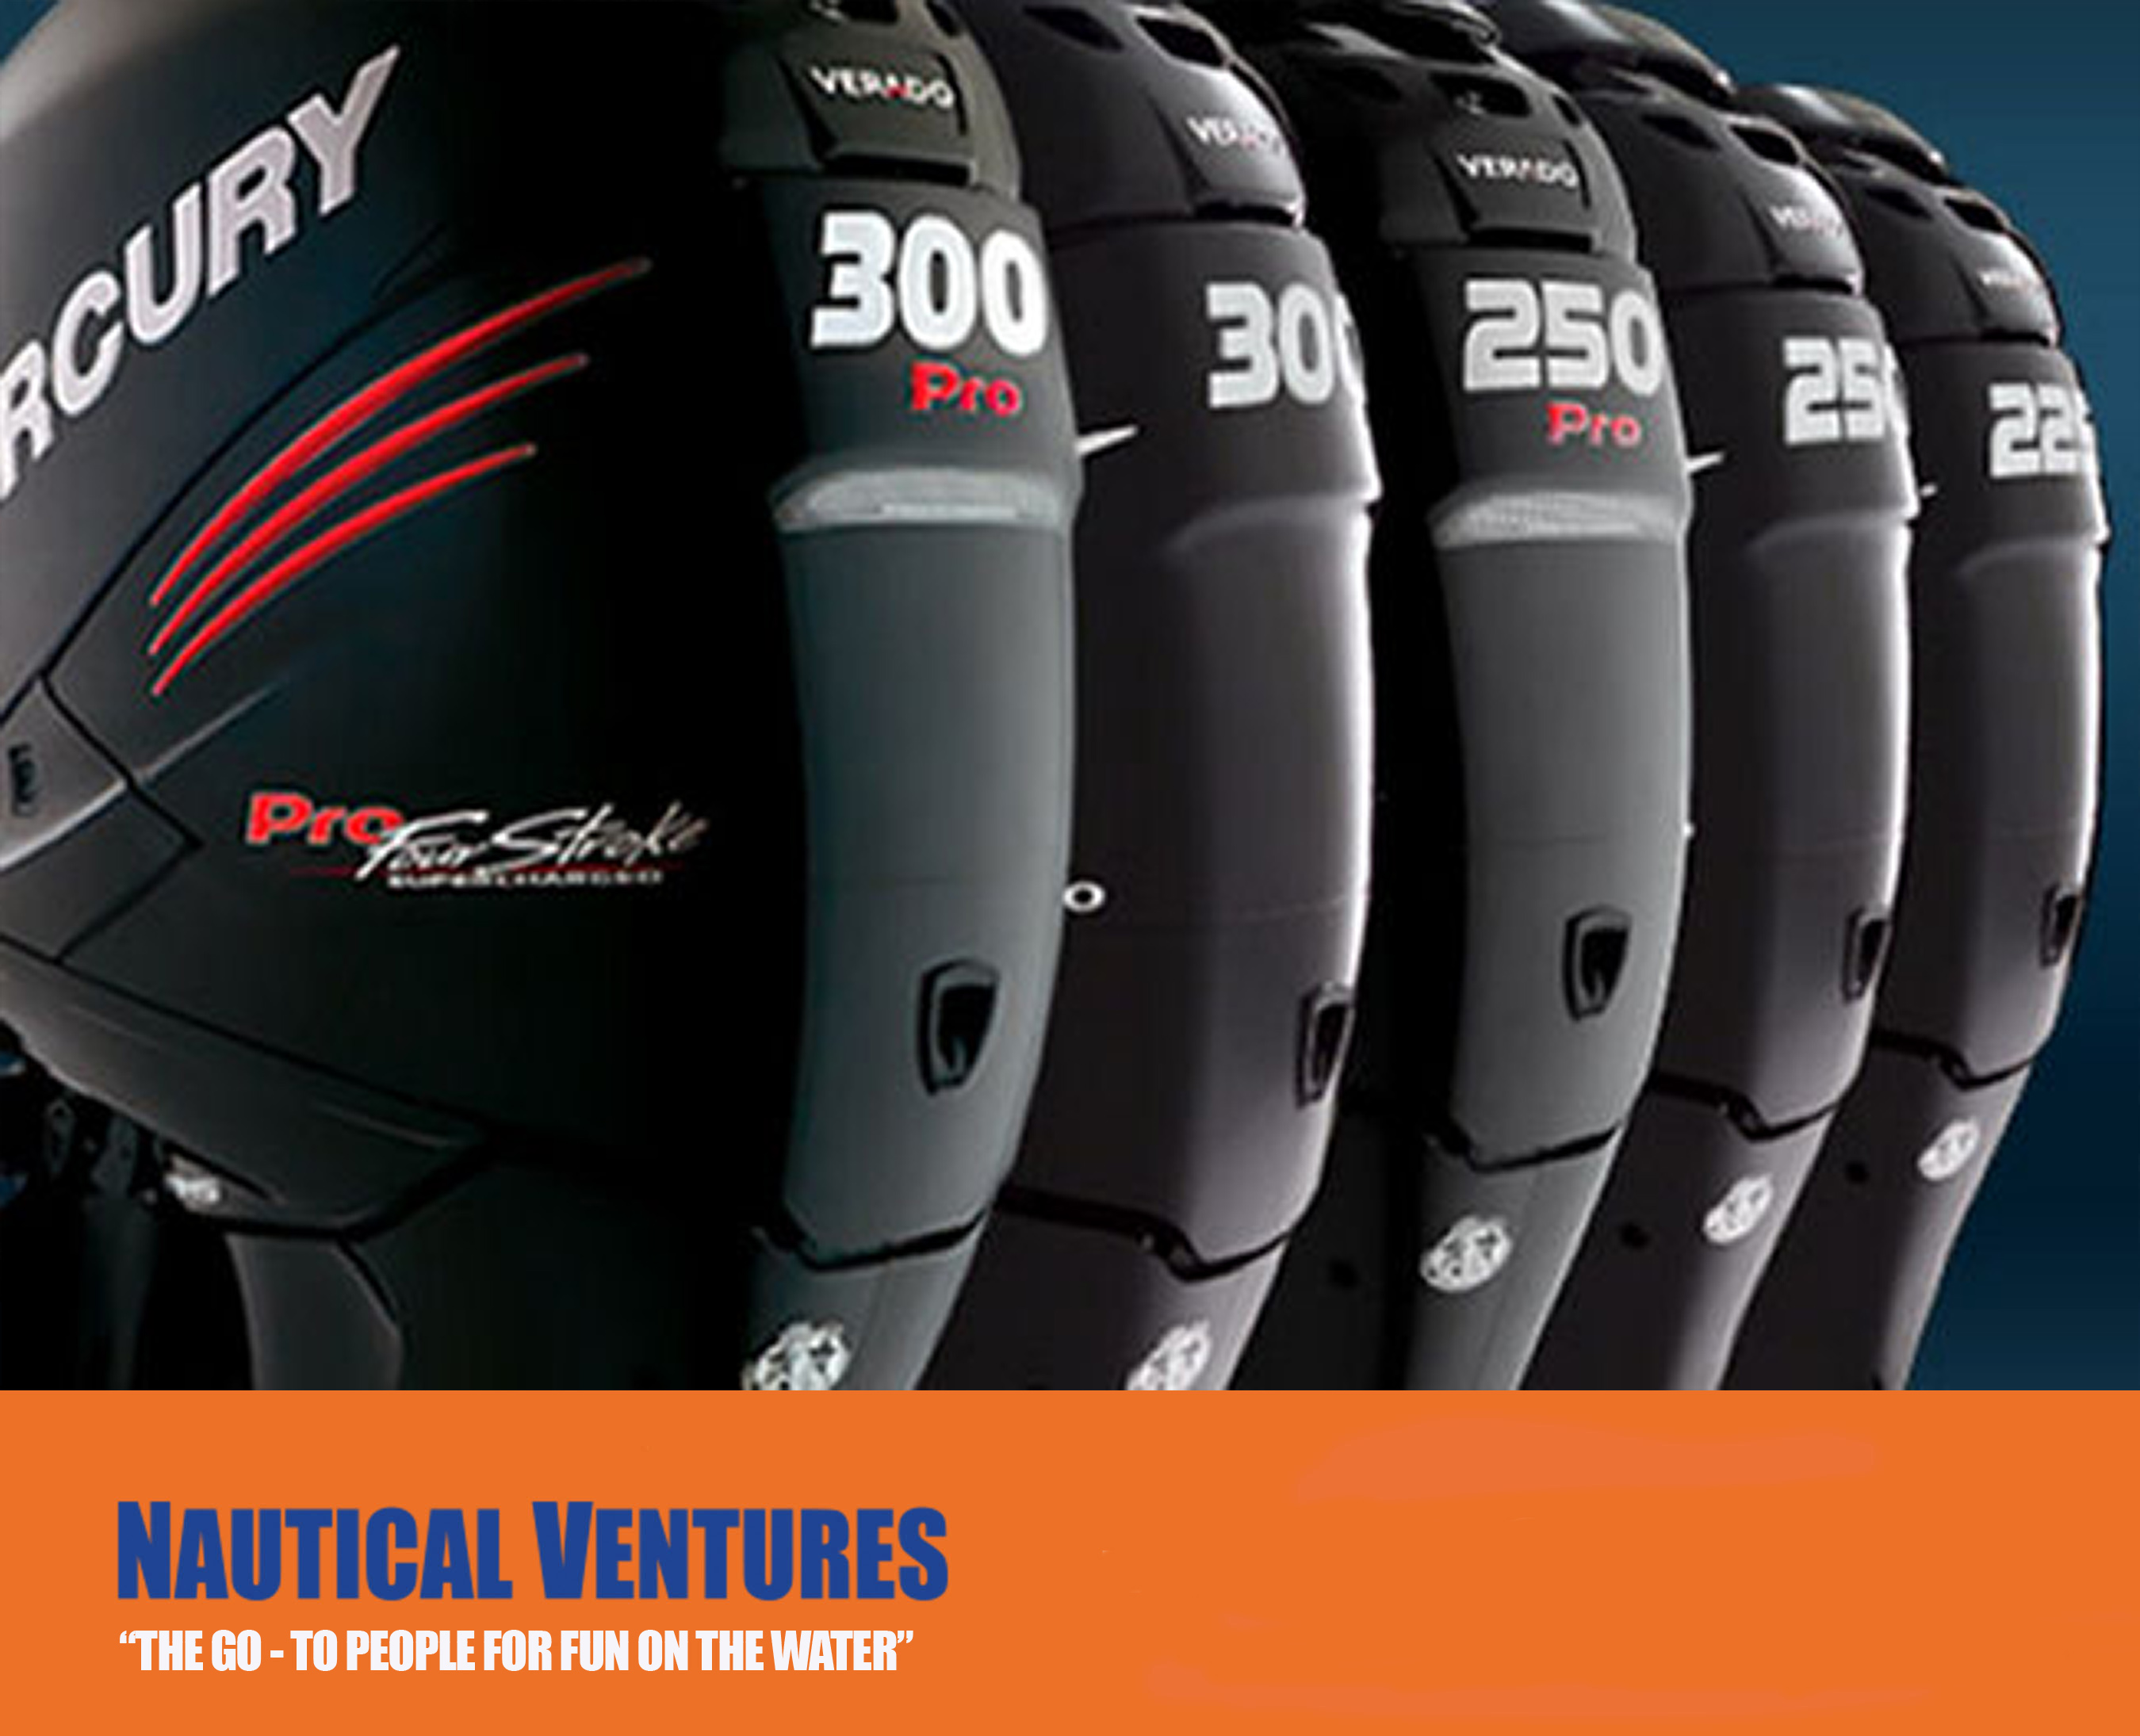 Nautical Ventures Continues To Grow With The Help of Mercury Marine